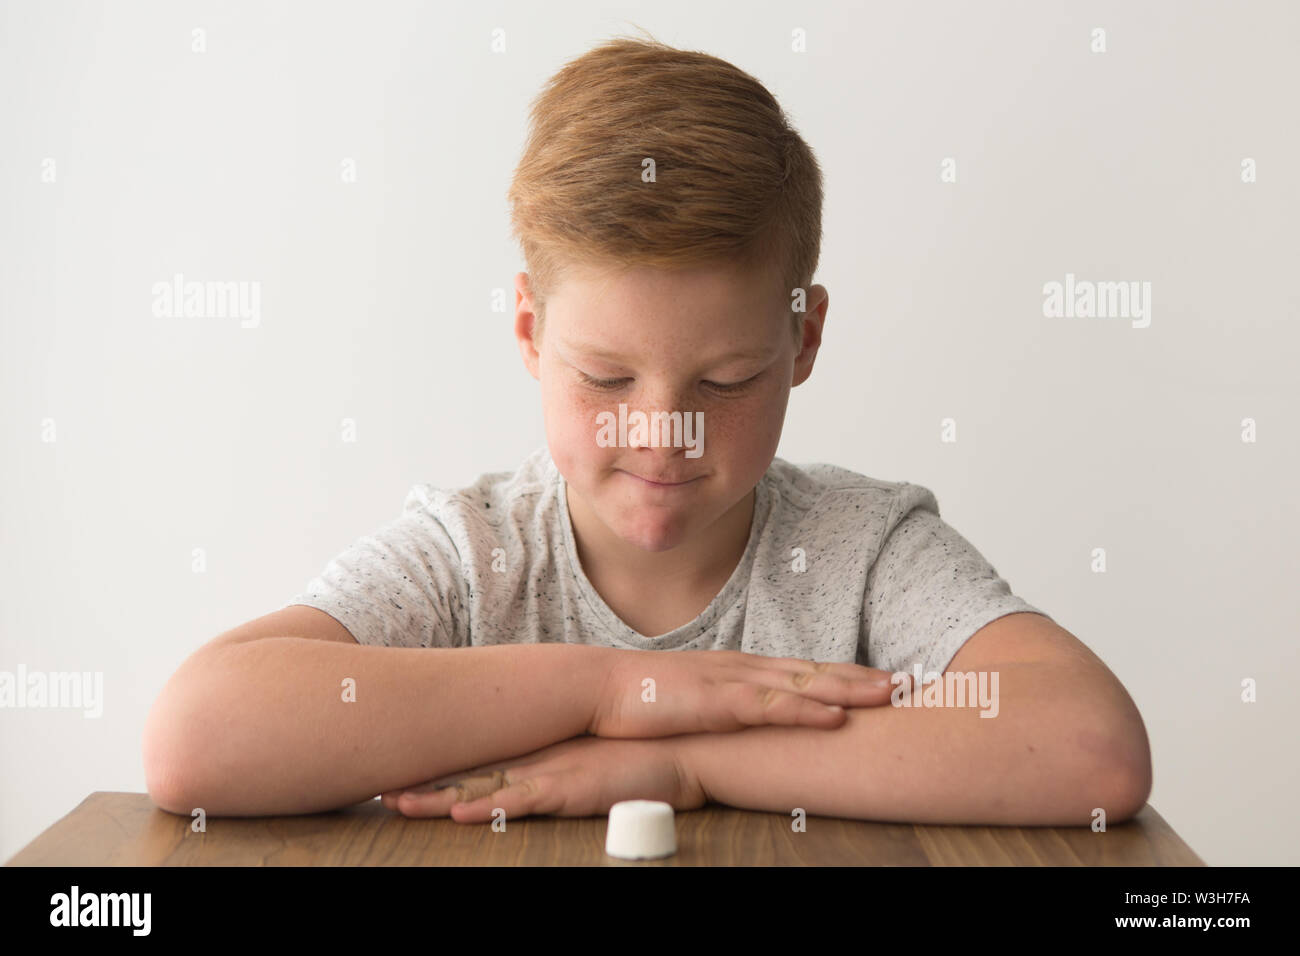 Red-head caucasian boy sits at a table with a single marshmallow, attempting the marshmallow test Stock Photo